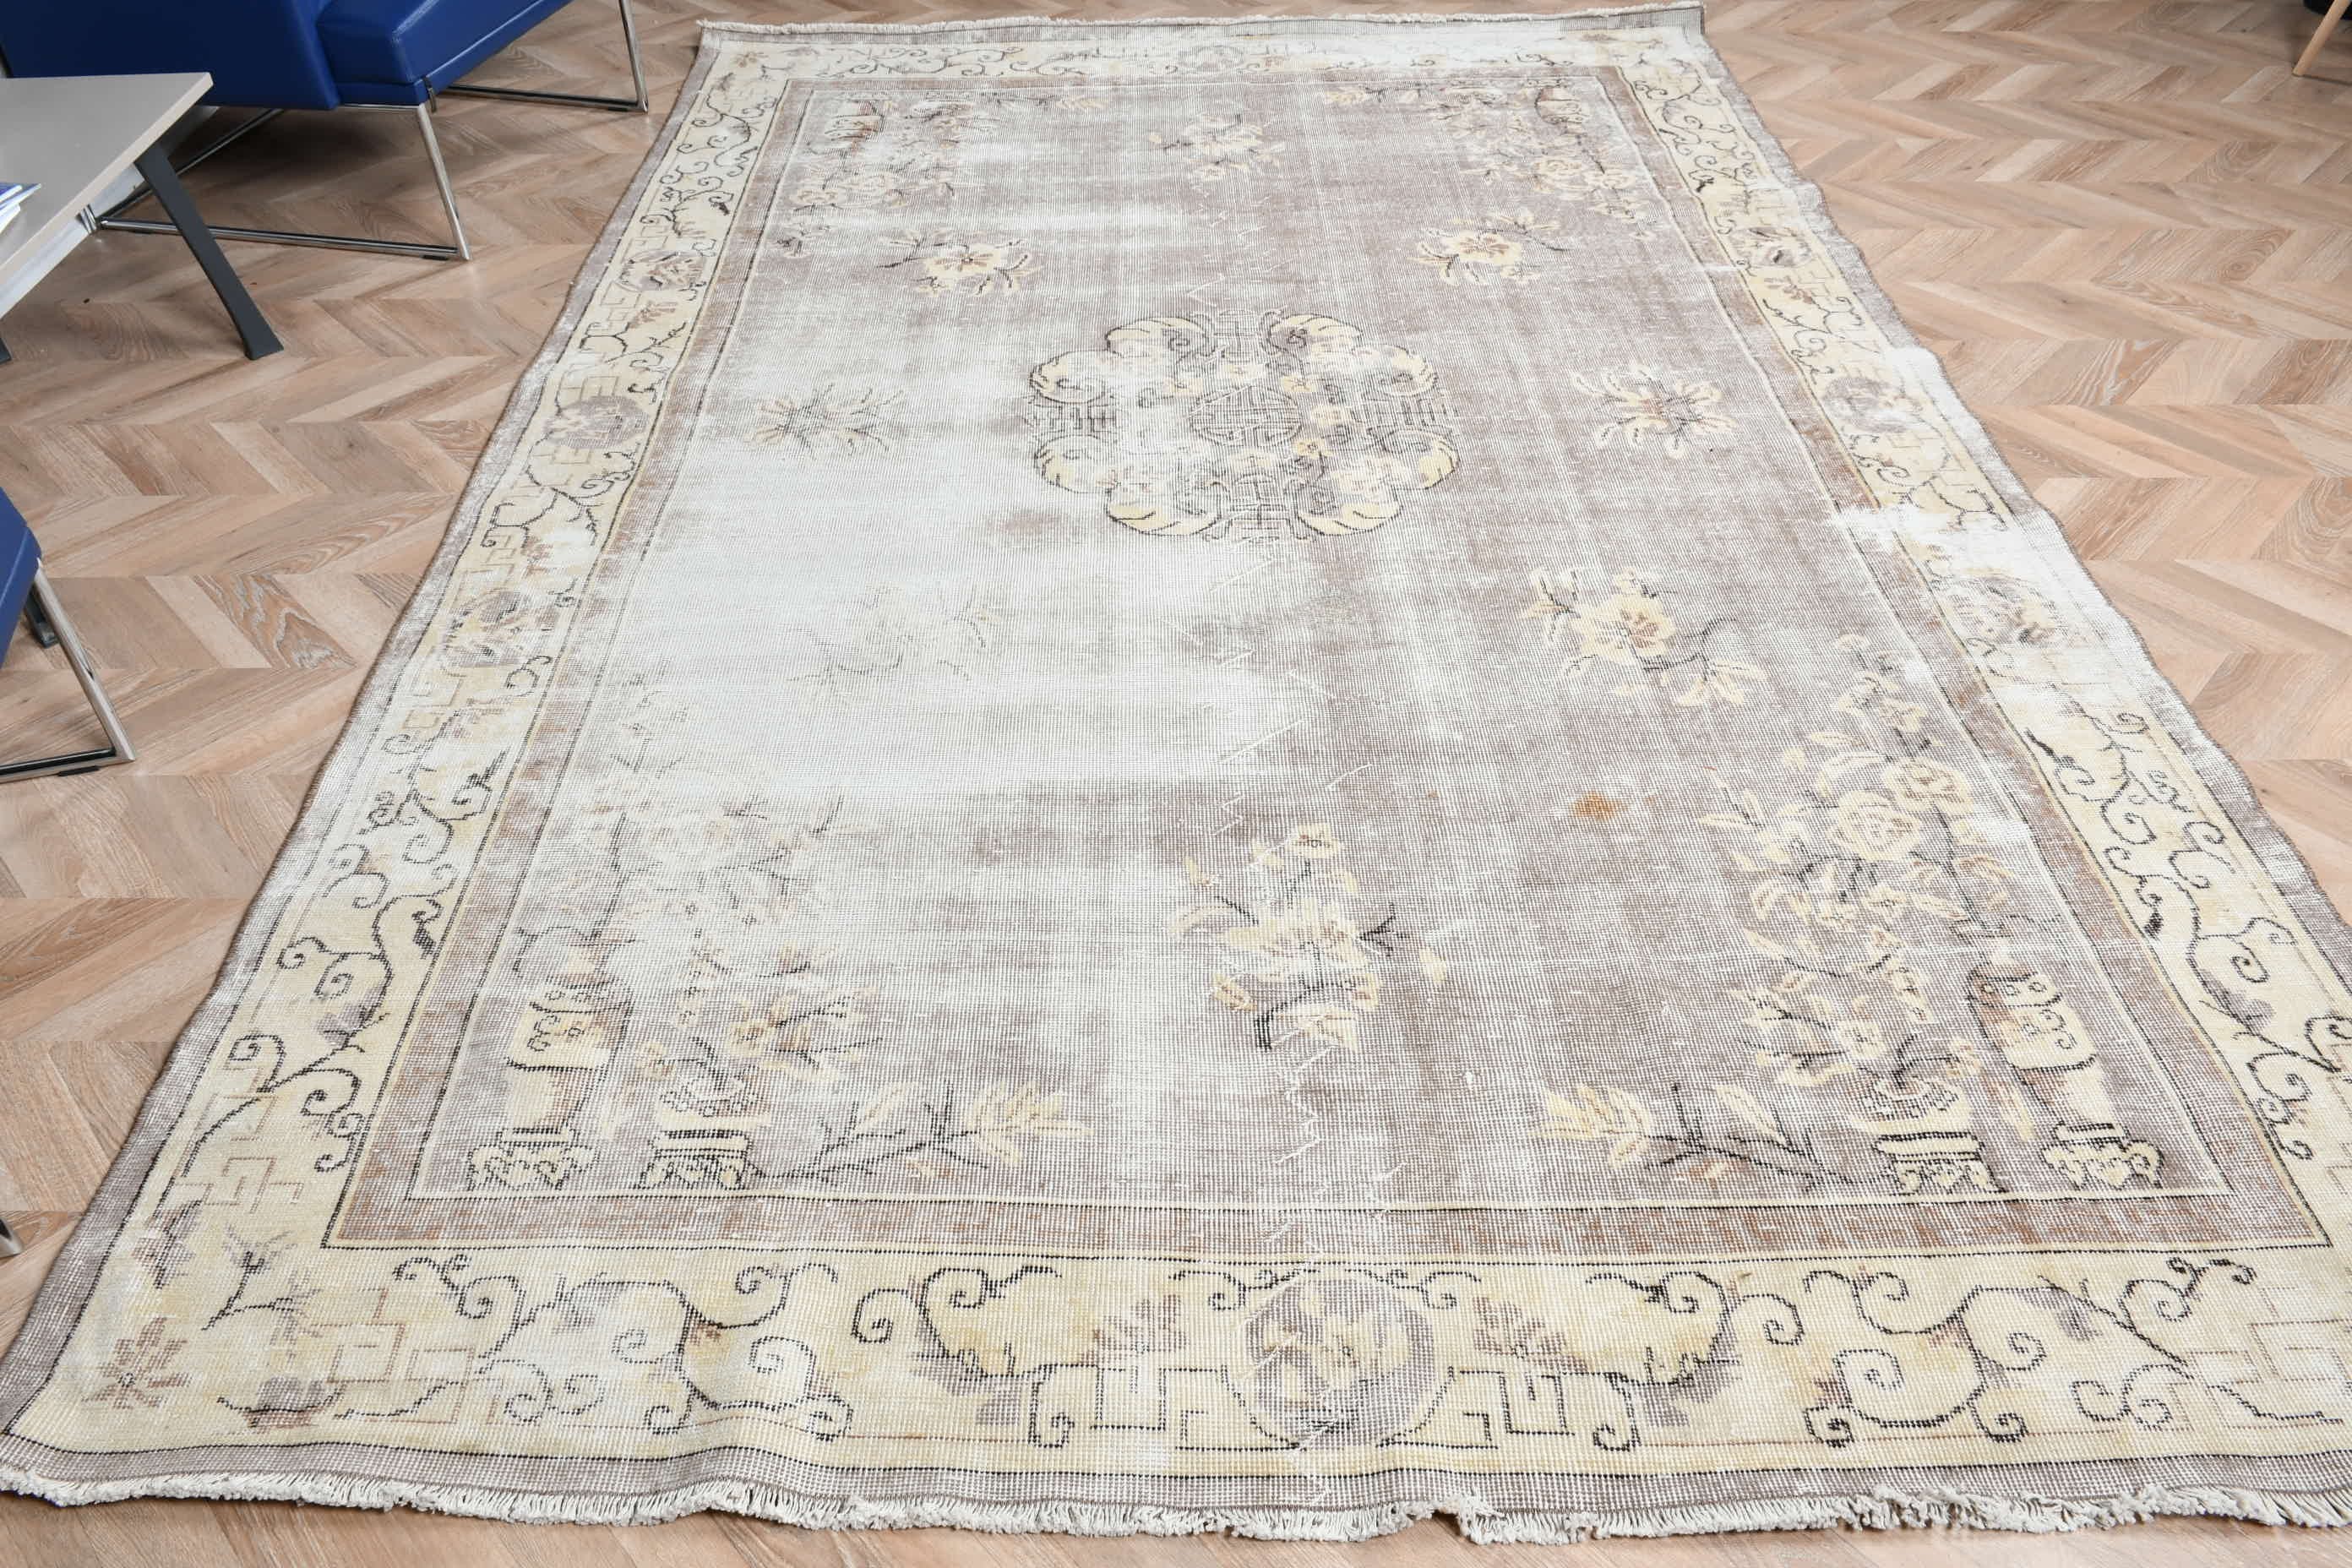 Antique Rugs, Outdoor Rug, Vintage Rugs, Kitchen Rug, Dining Room Rug, Salon Rugs, 6.7x10.3 ft Large Rugs, Brown Kitchen Rug, Turkish Rugs